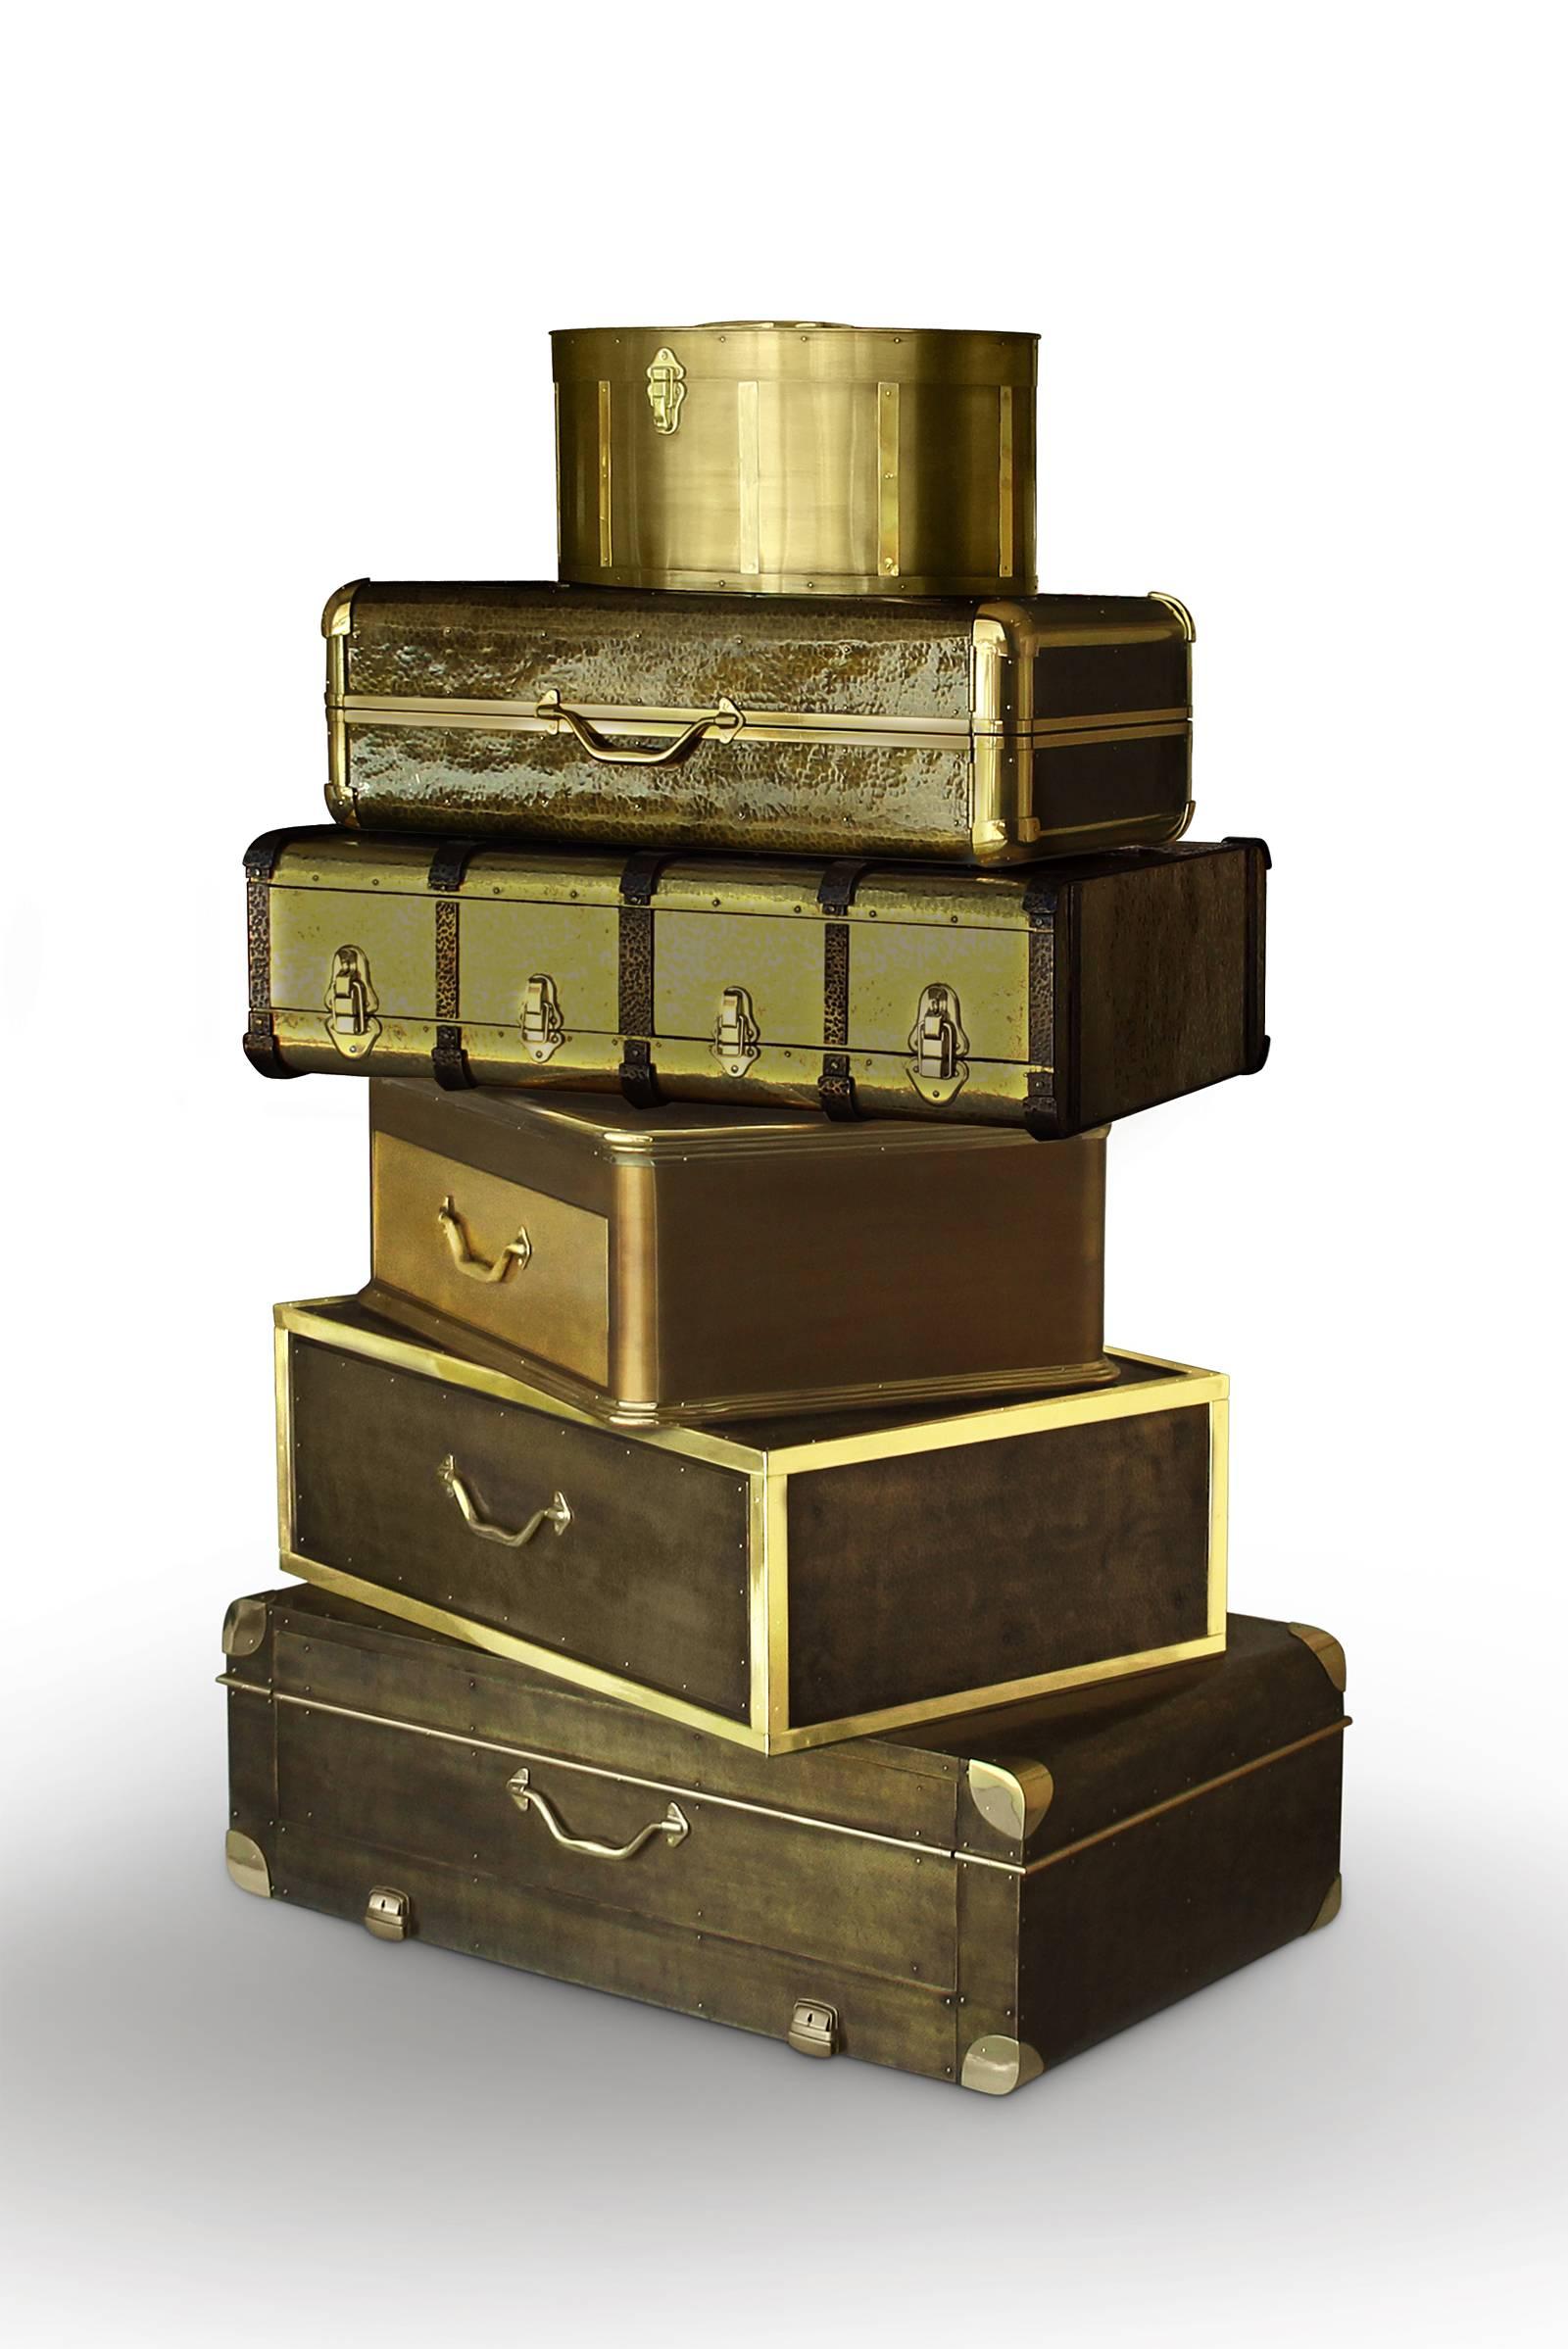 Jewelry safe vintage golded distinguishes
itself following a new hyperluxury trend. Special compartments
for jewelry and precious liquors, watch winders for watches and
humidors for cigars. Exceptional piece. With brushed gold brass
with patina